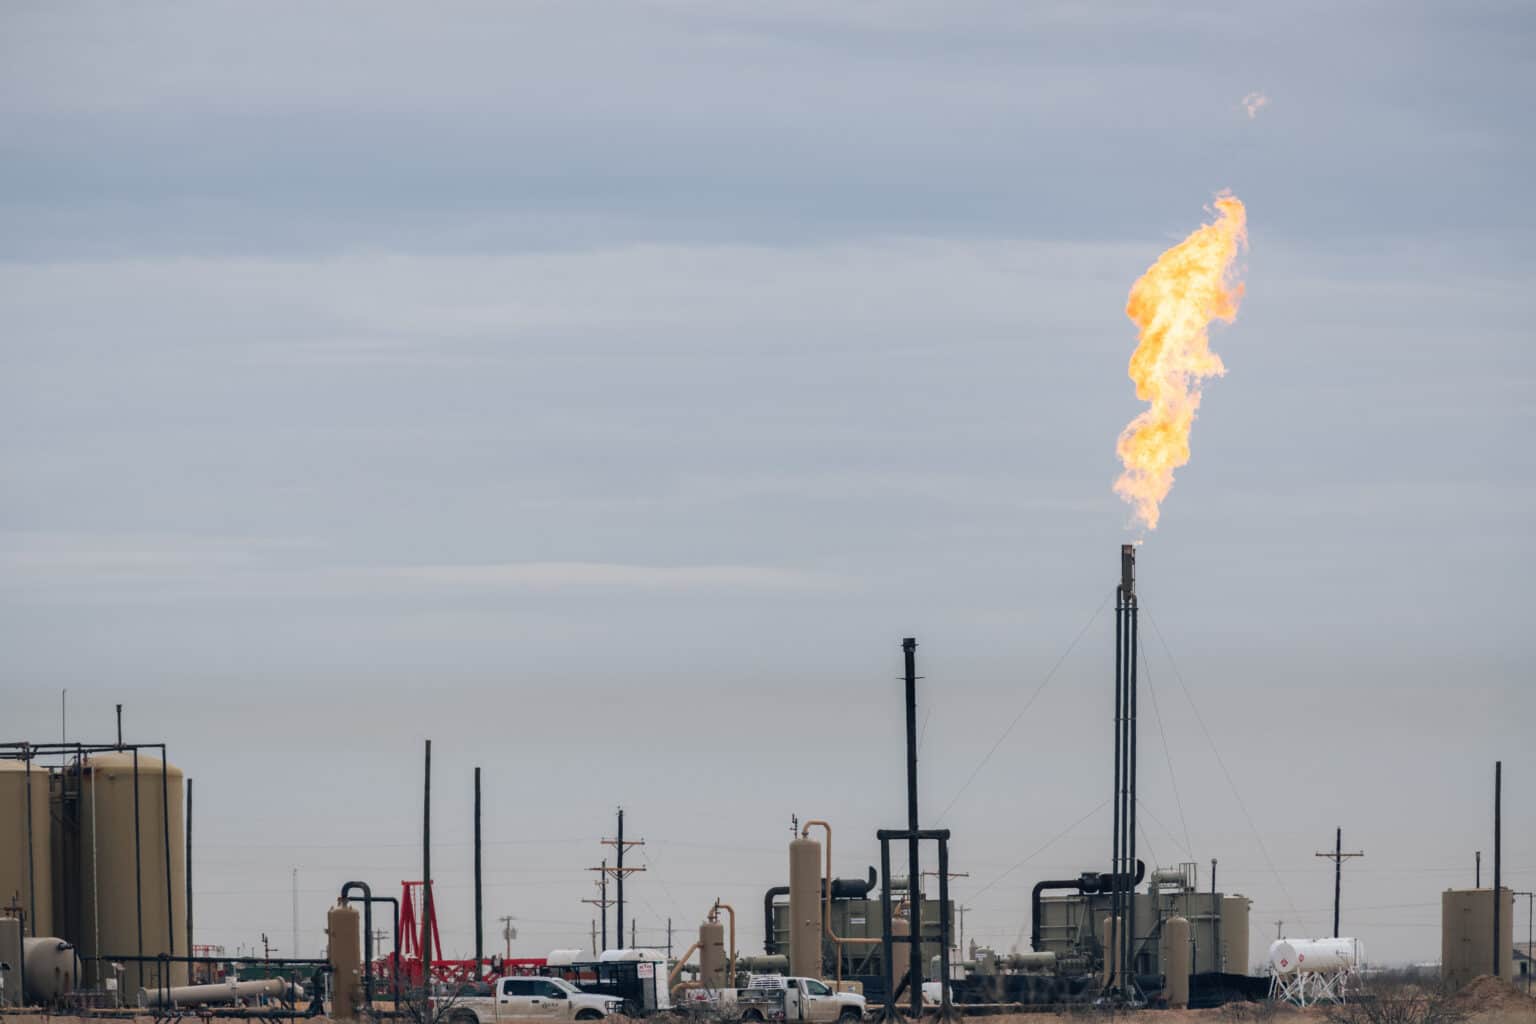 A methane flare burning at an oil and gas site with various tanks and pipes in the Permian Basin